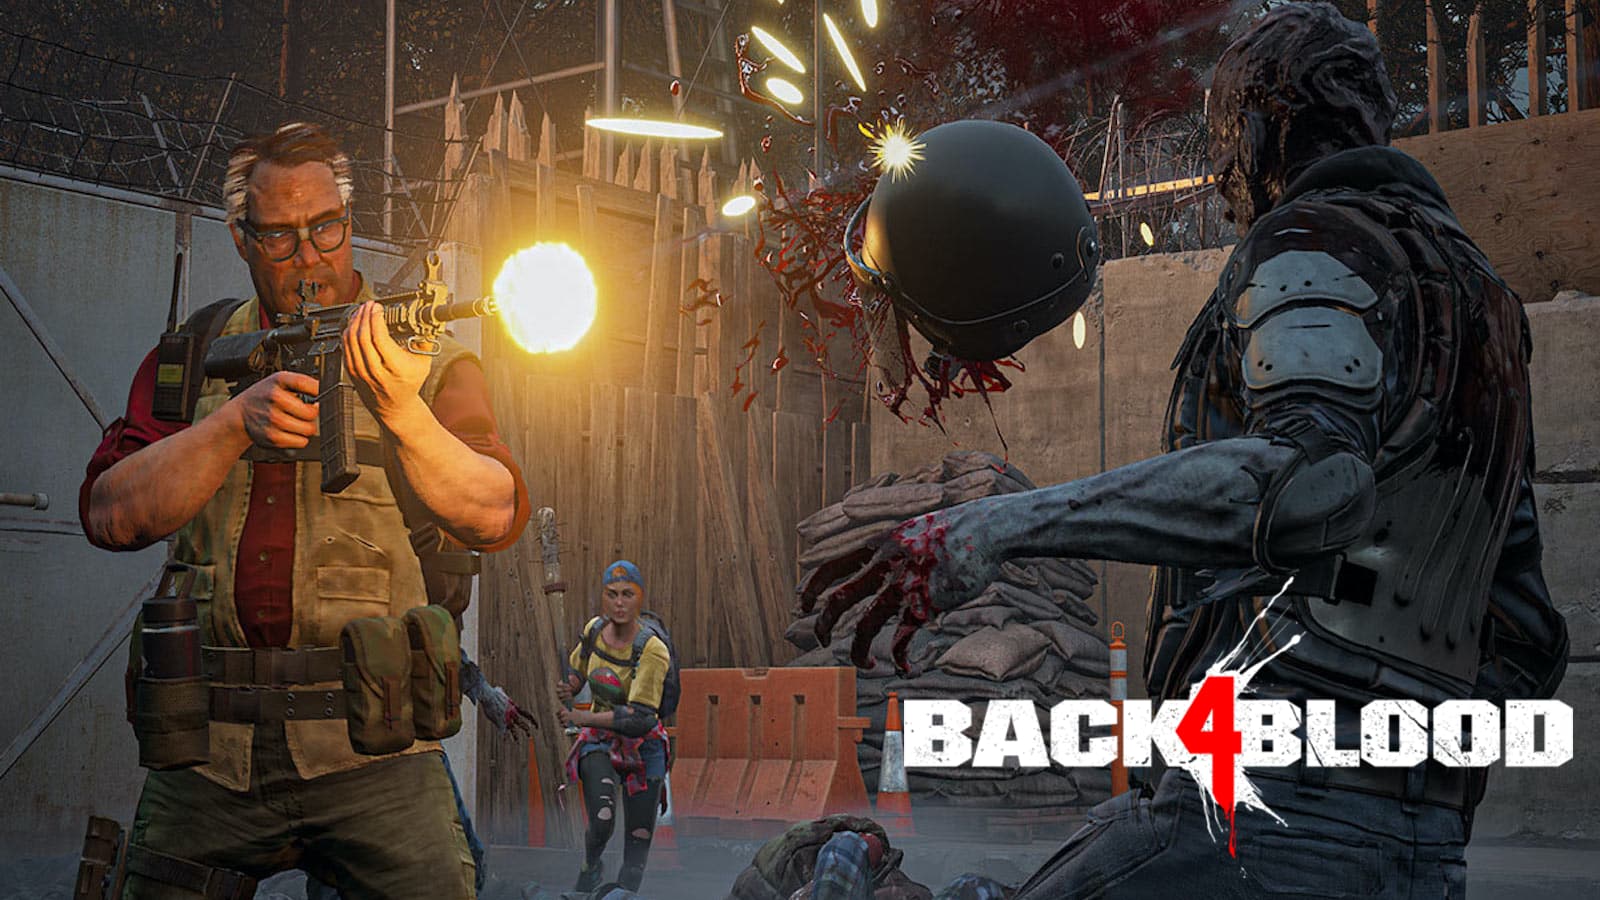 Back 4 Blood Crossplay Explained: How Co-Op Multiplayer Works